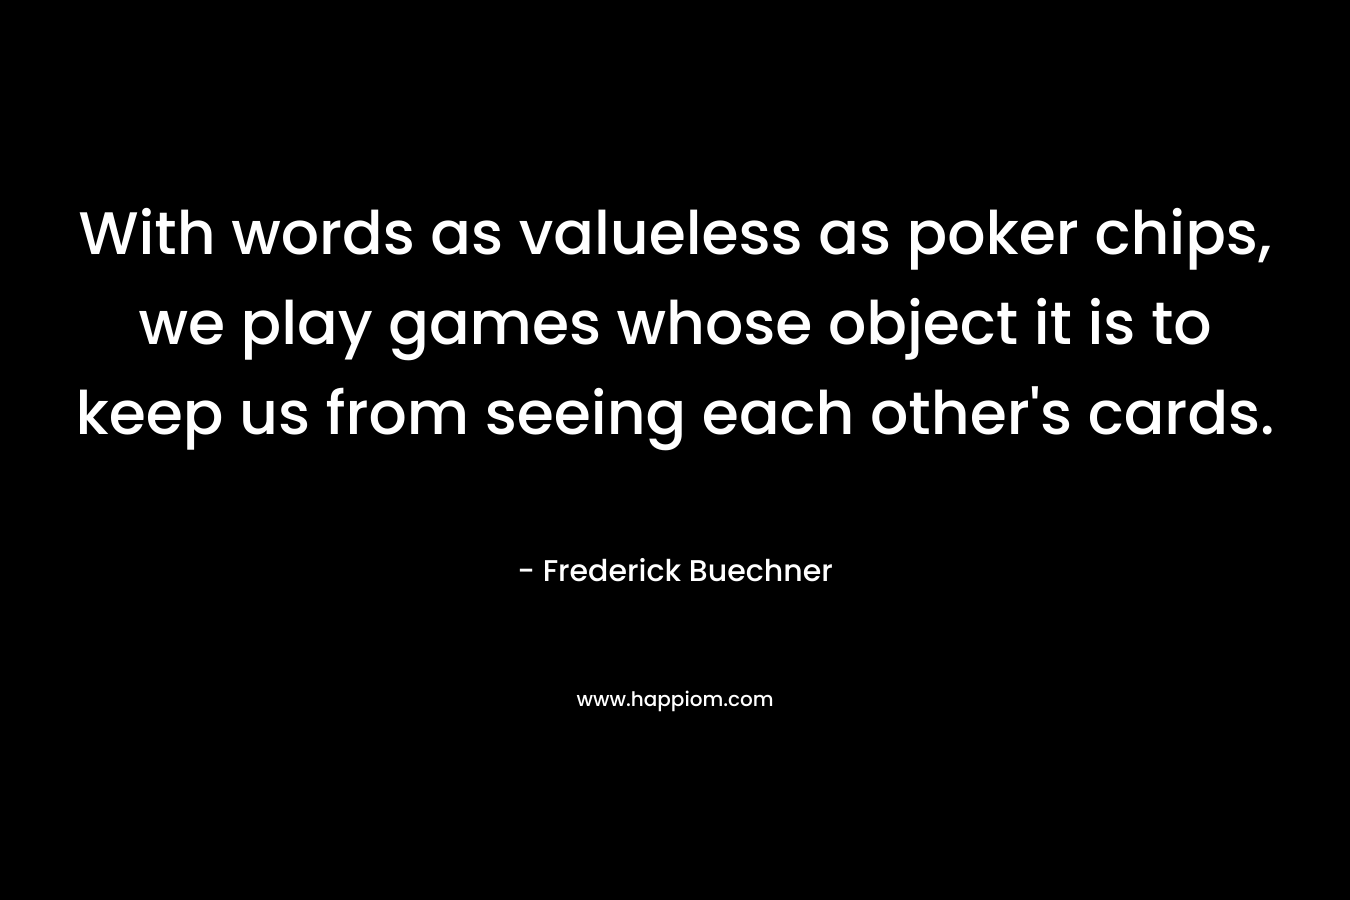 With words as valueless as poker chips, we play games whose object it is to keep us from seeing each other’s cards. – Frederick Buechner